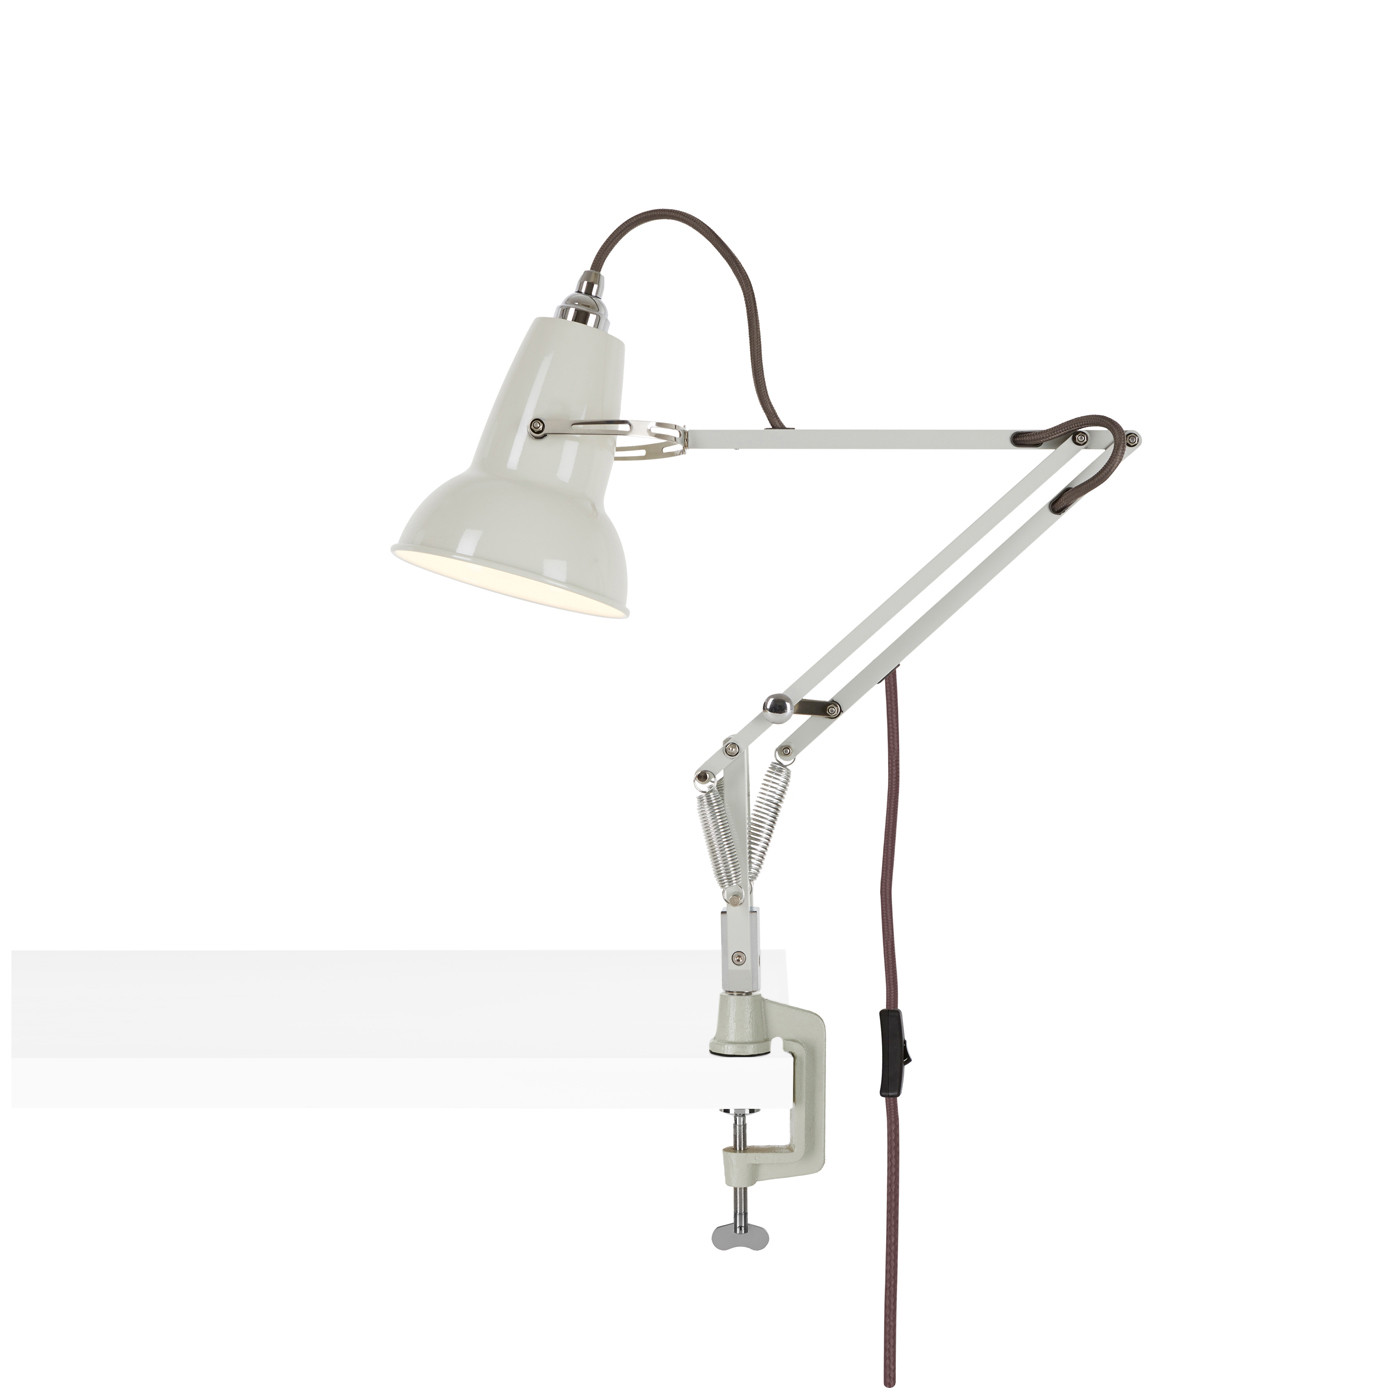 Anglepoise Original 1227 Mini Lamp with Desk Clamp